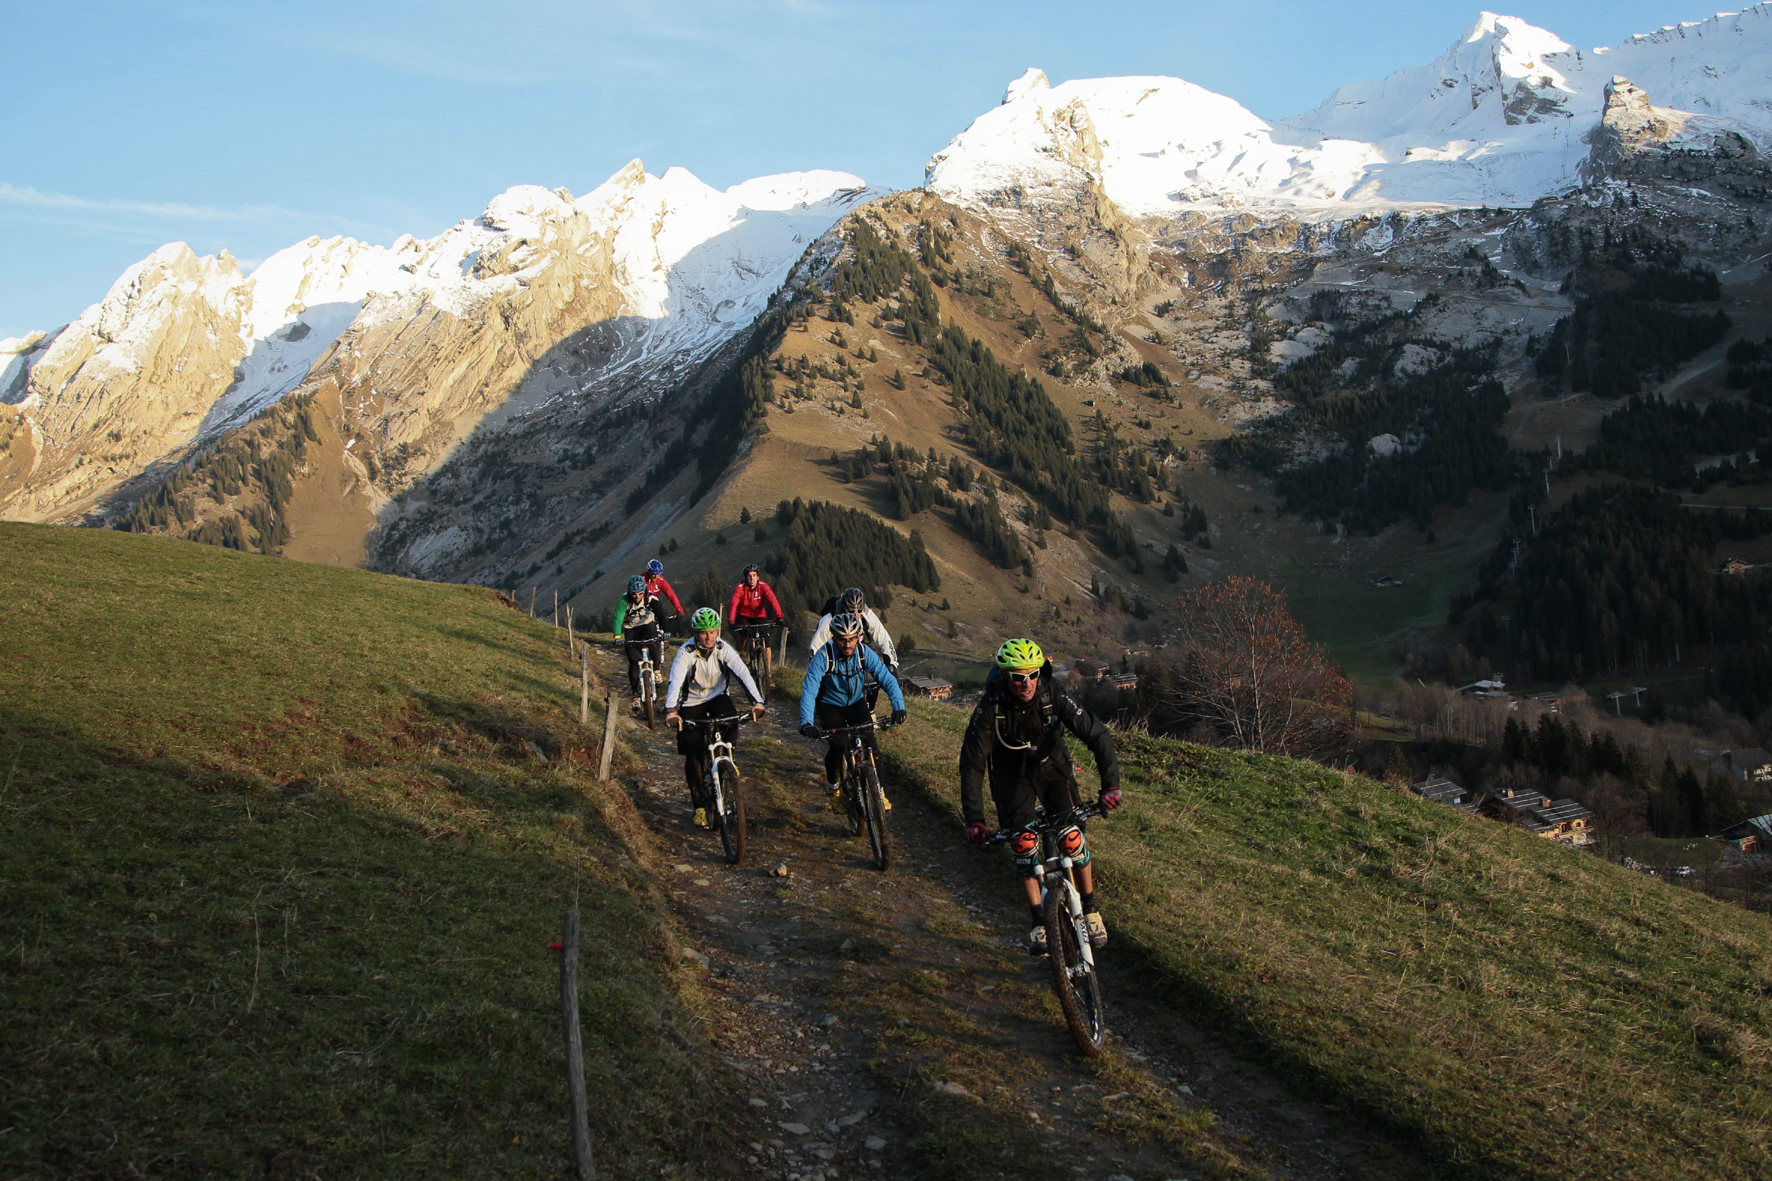 Out finding the right trails near Clusaz. Photo: S. Boue/ASO